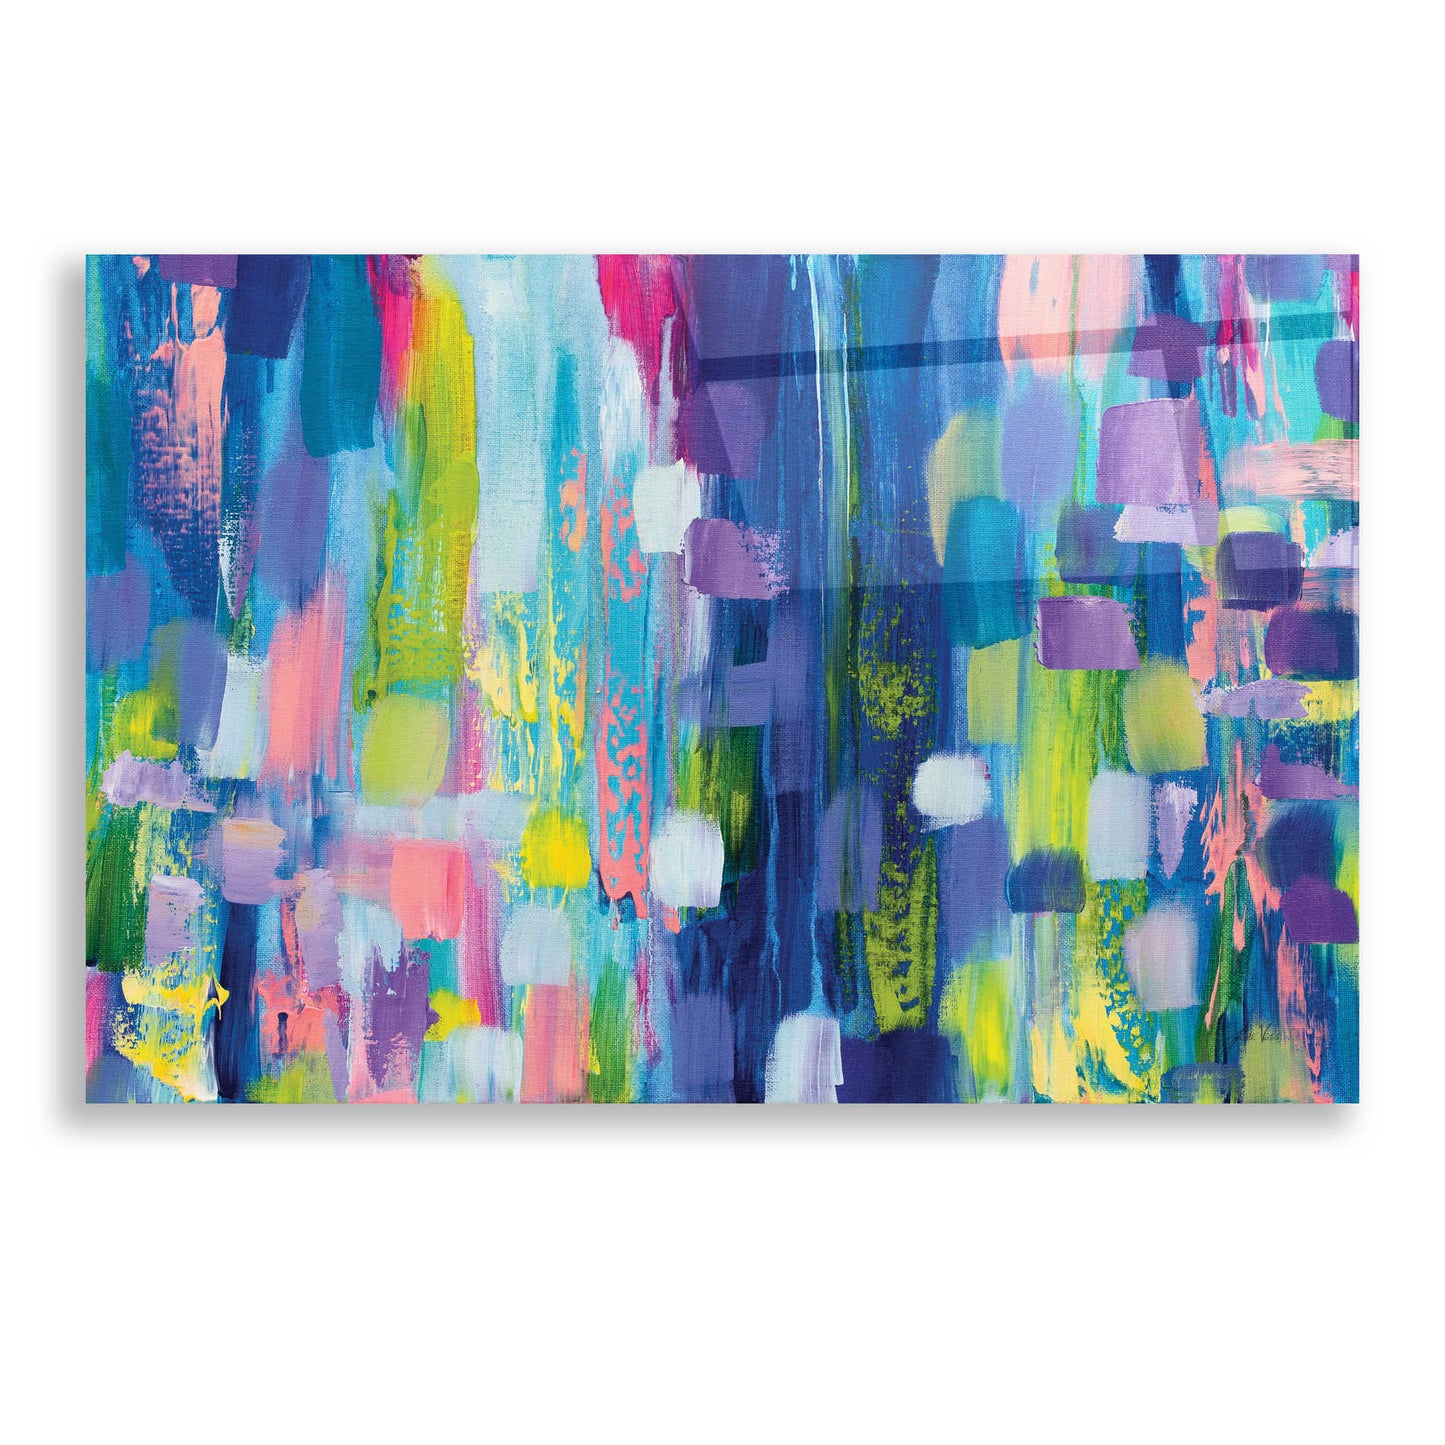 Epic Art 'Radiance' by Jeanette Vertentes, Acrylic Glass Wall Art,24x16